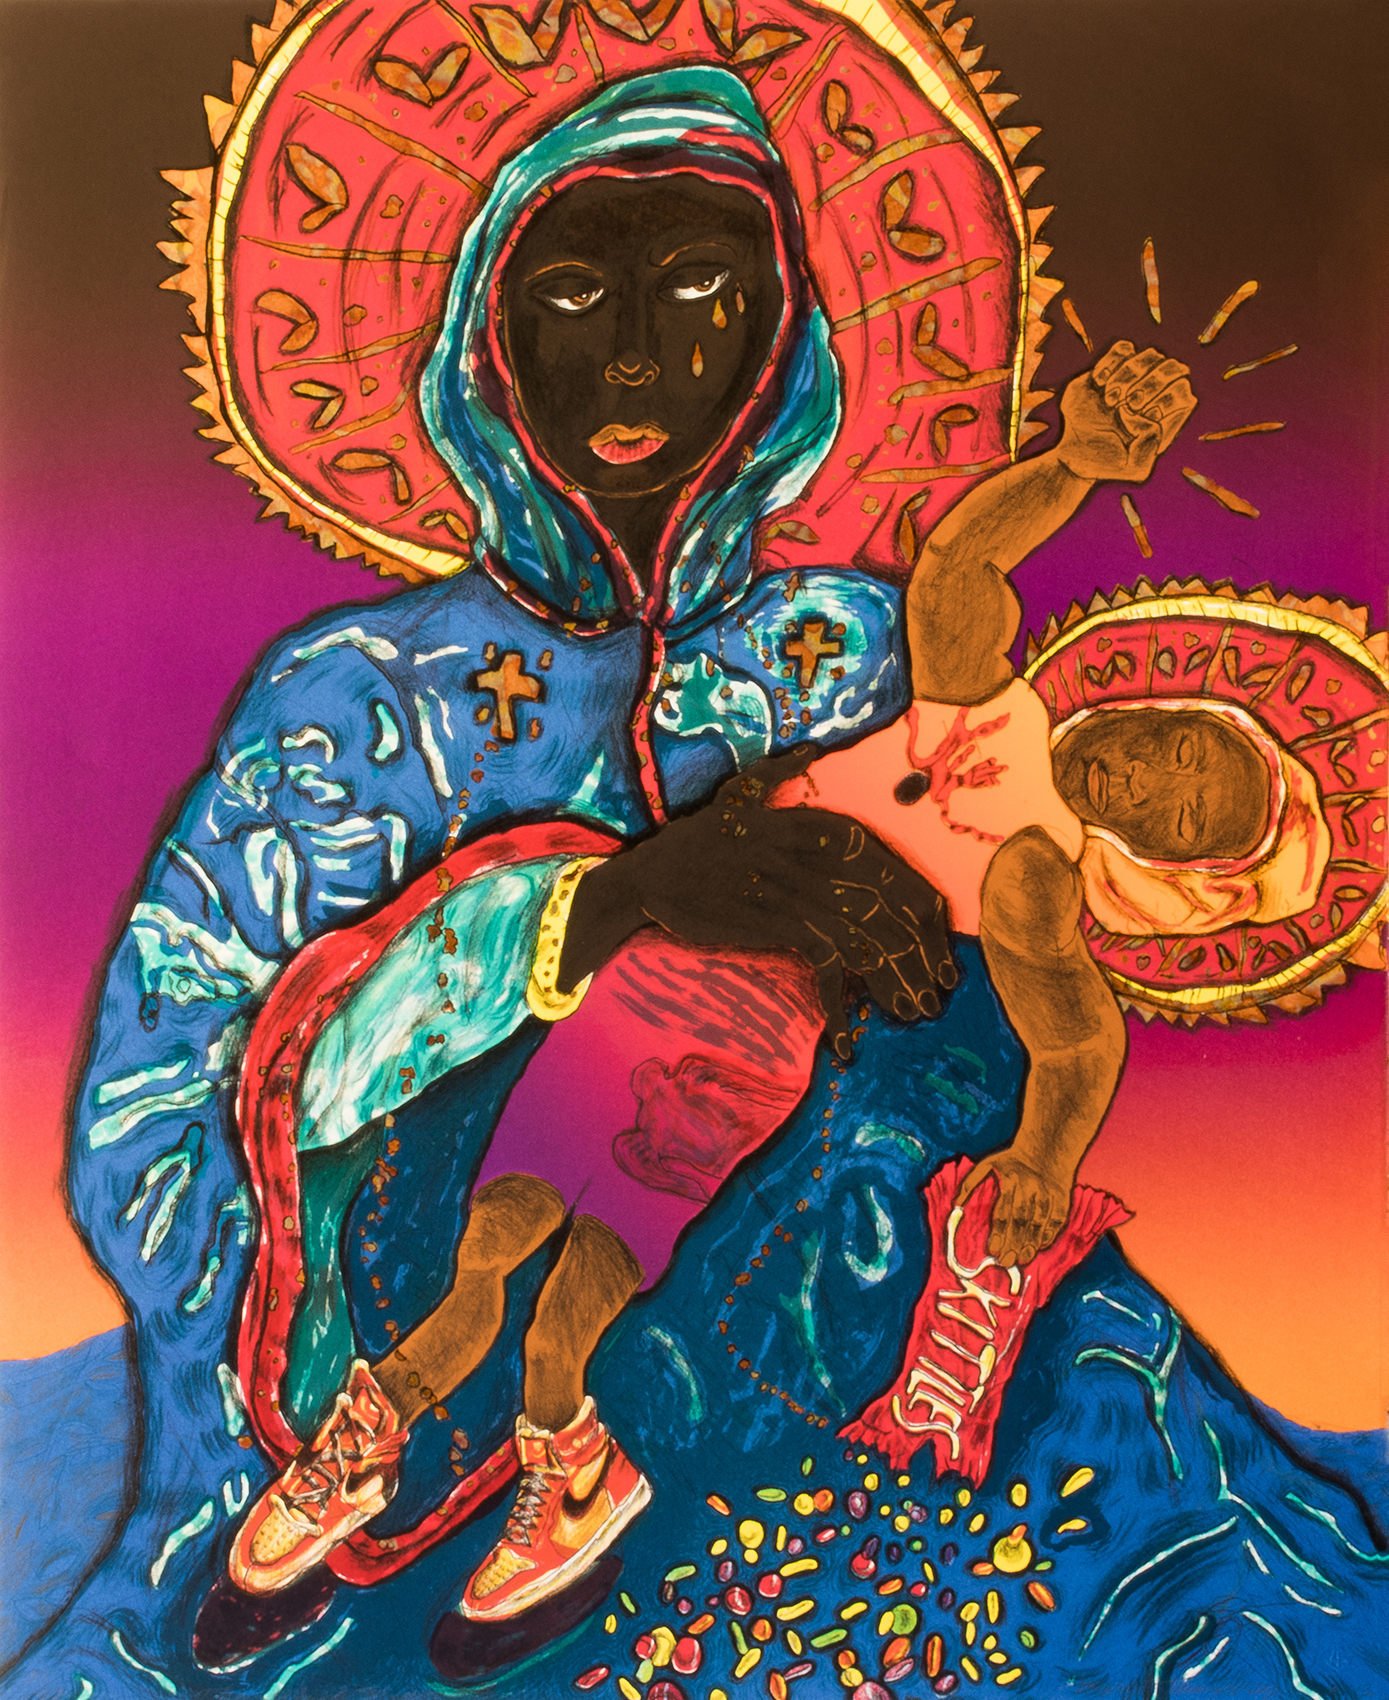 A Black mother in the style of the Virgin Mary holding her child with a spilling skittles bag in one hand and the other raised in a power fist.